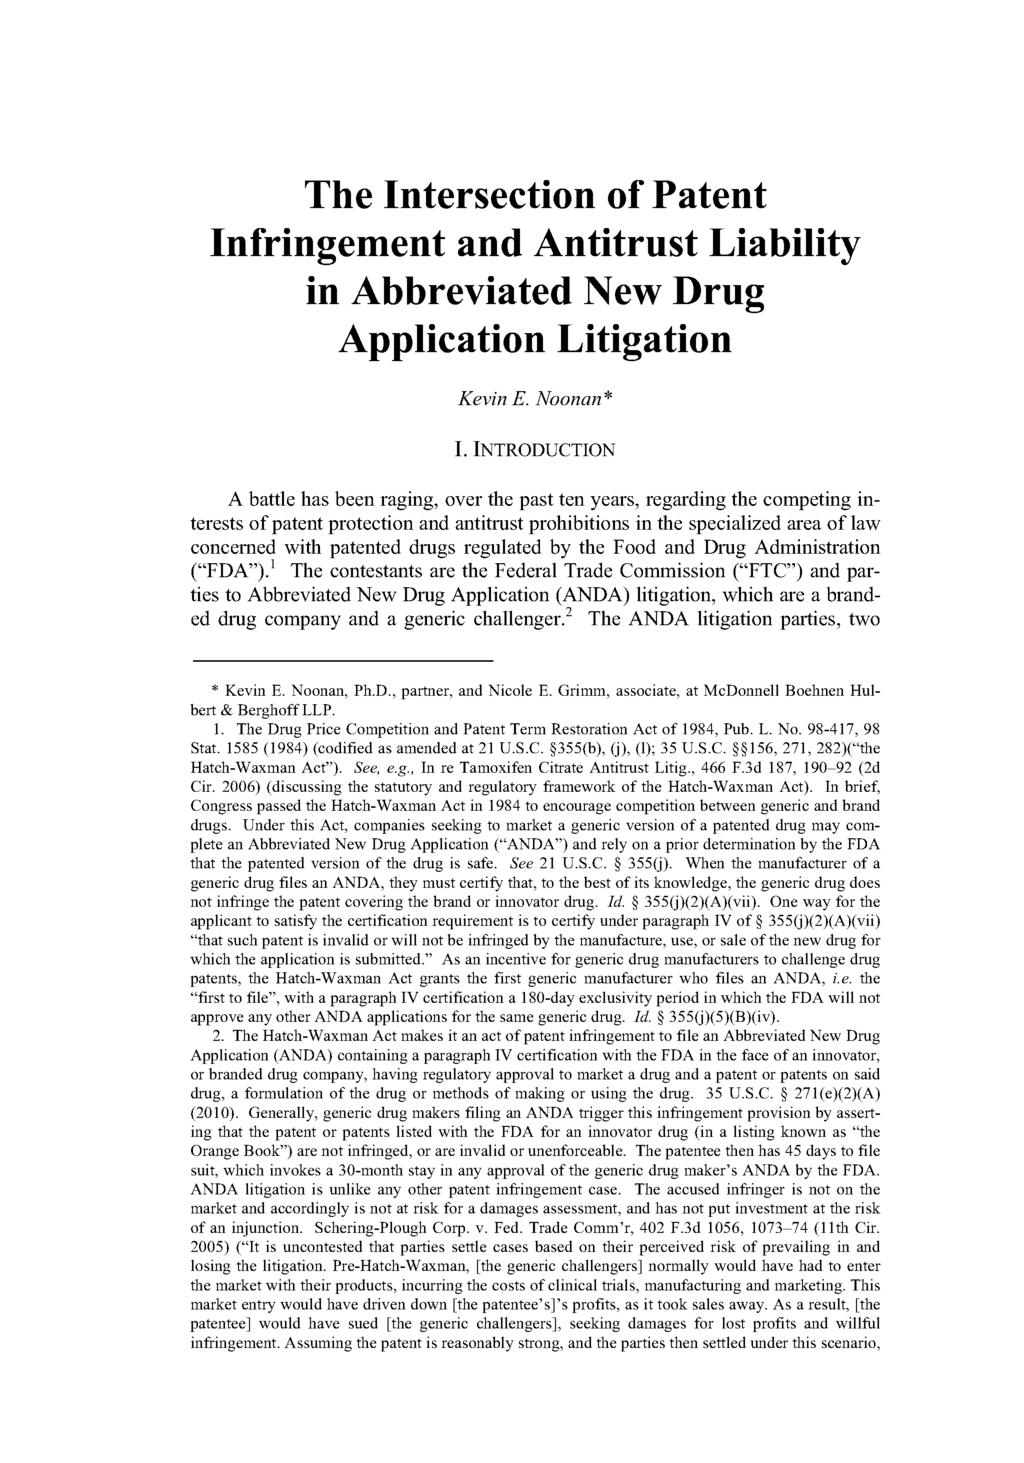 Noonan: Intersection of Patent Infringement and Antitrust Liability in Ab The Intersection of Patent Infringement and Antitrust Liability in Abbreviated New Drug Application Litigation Kevin E.